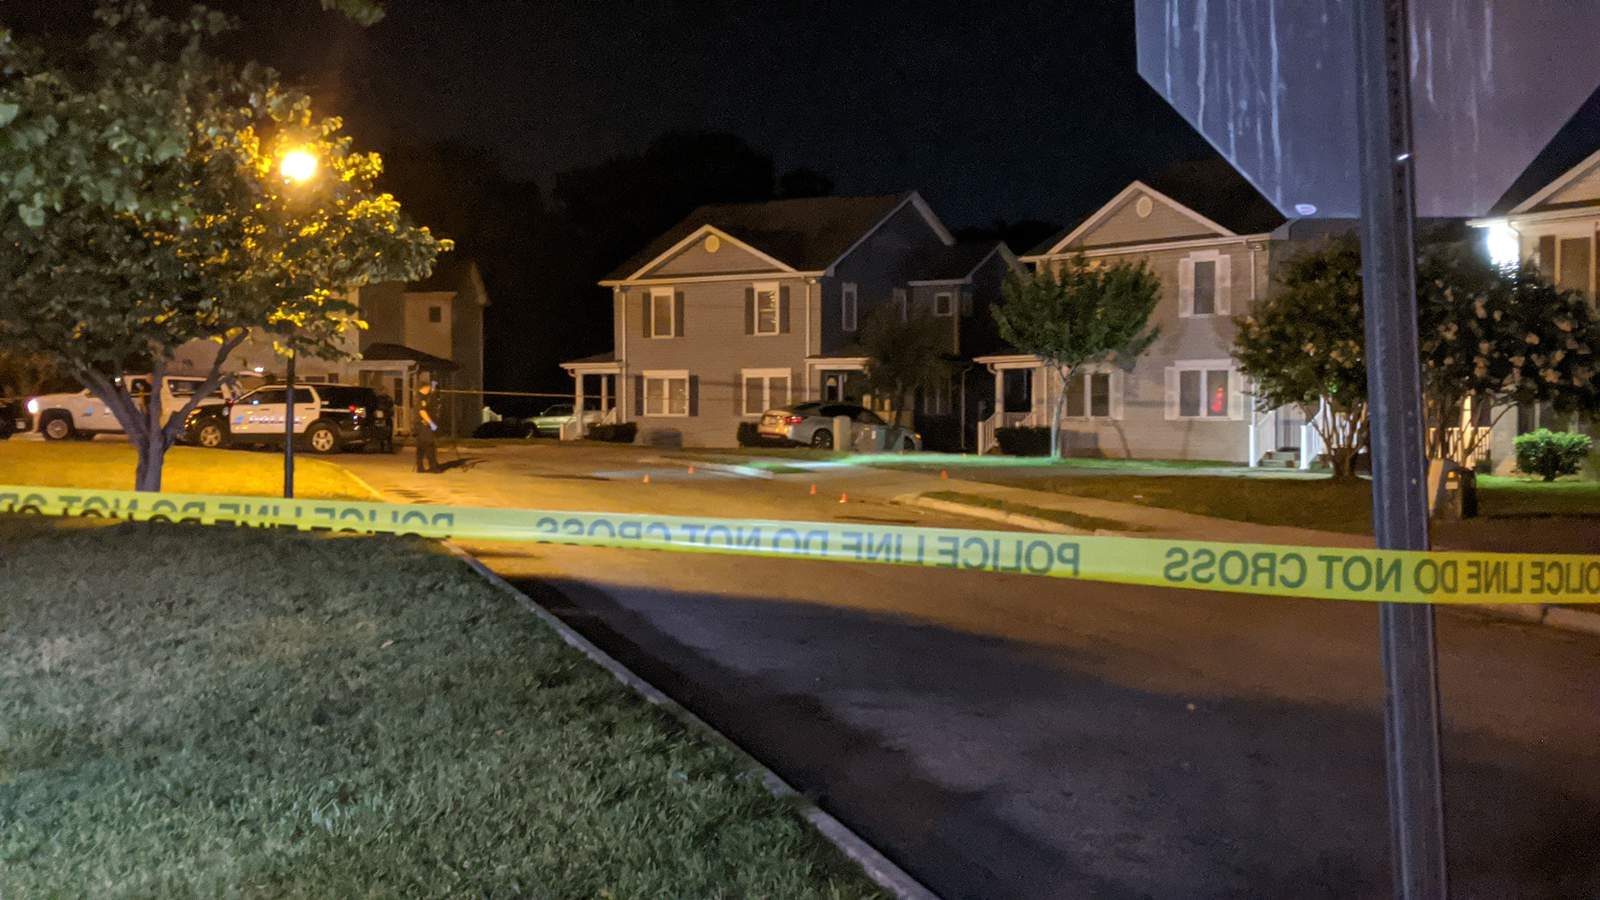 One person shot at Lincoln Terrace in Roanoke